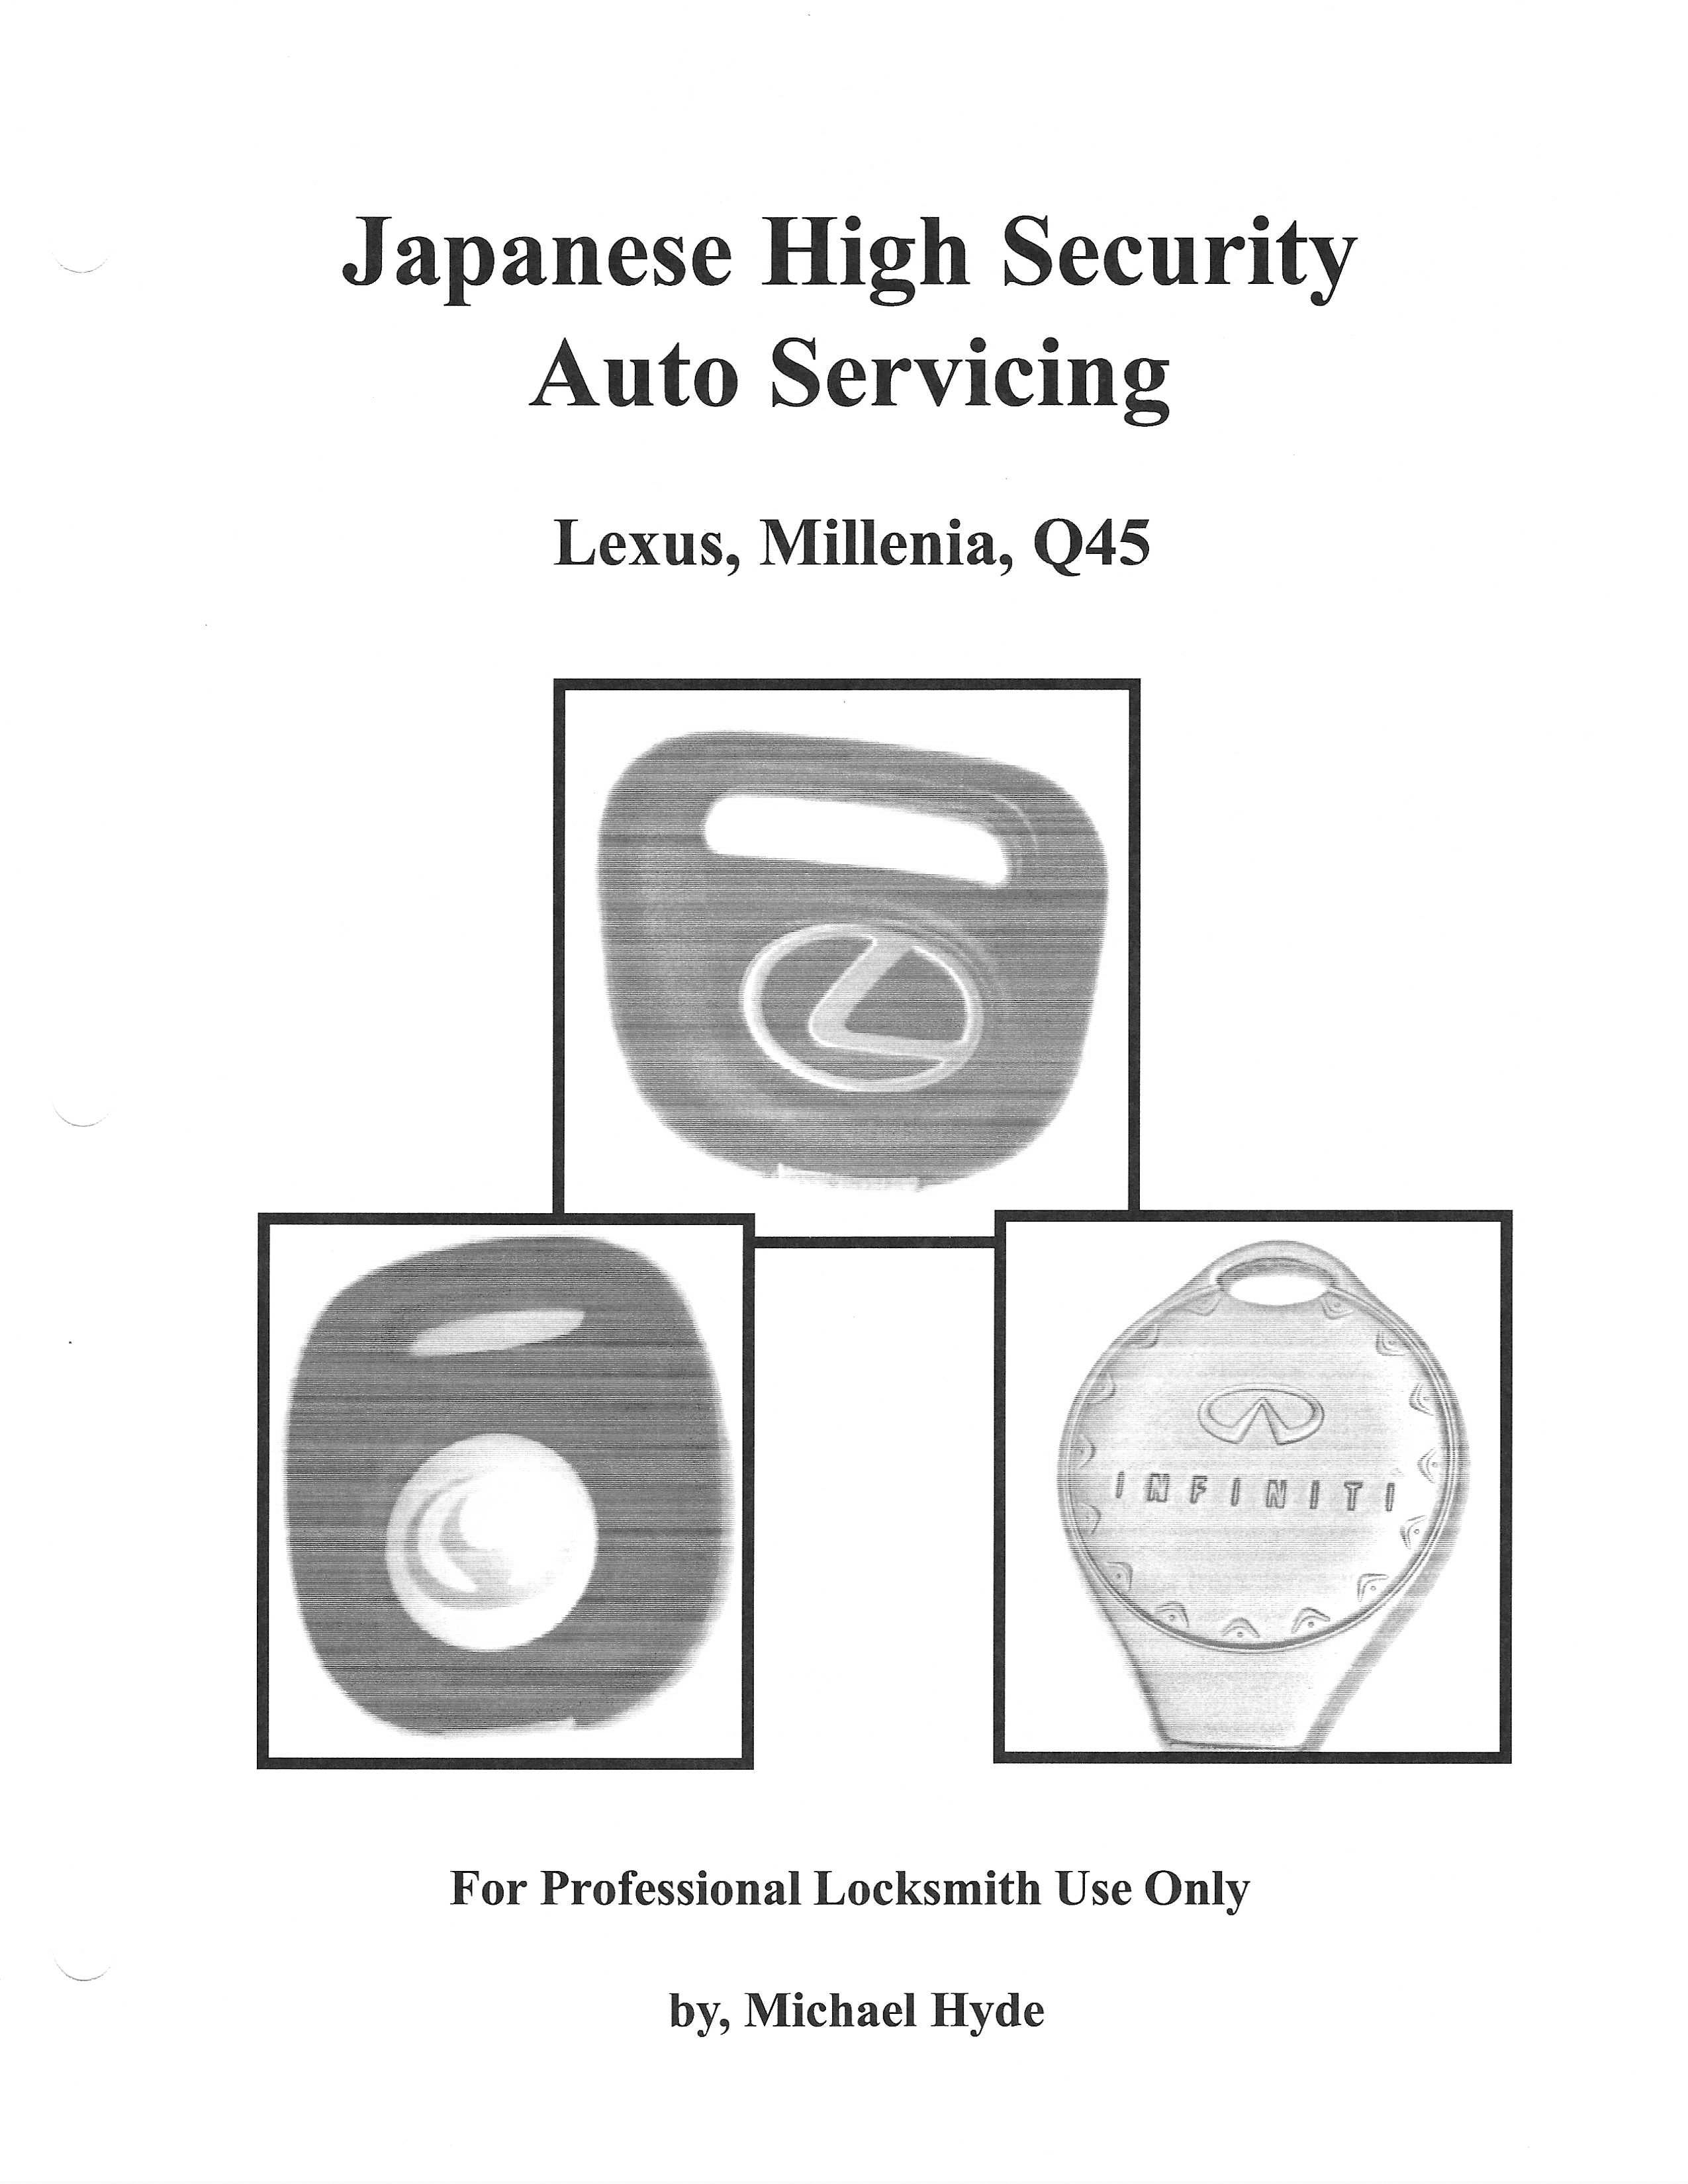 Japanese High Security Auto Servicing - Older Models